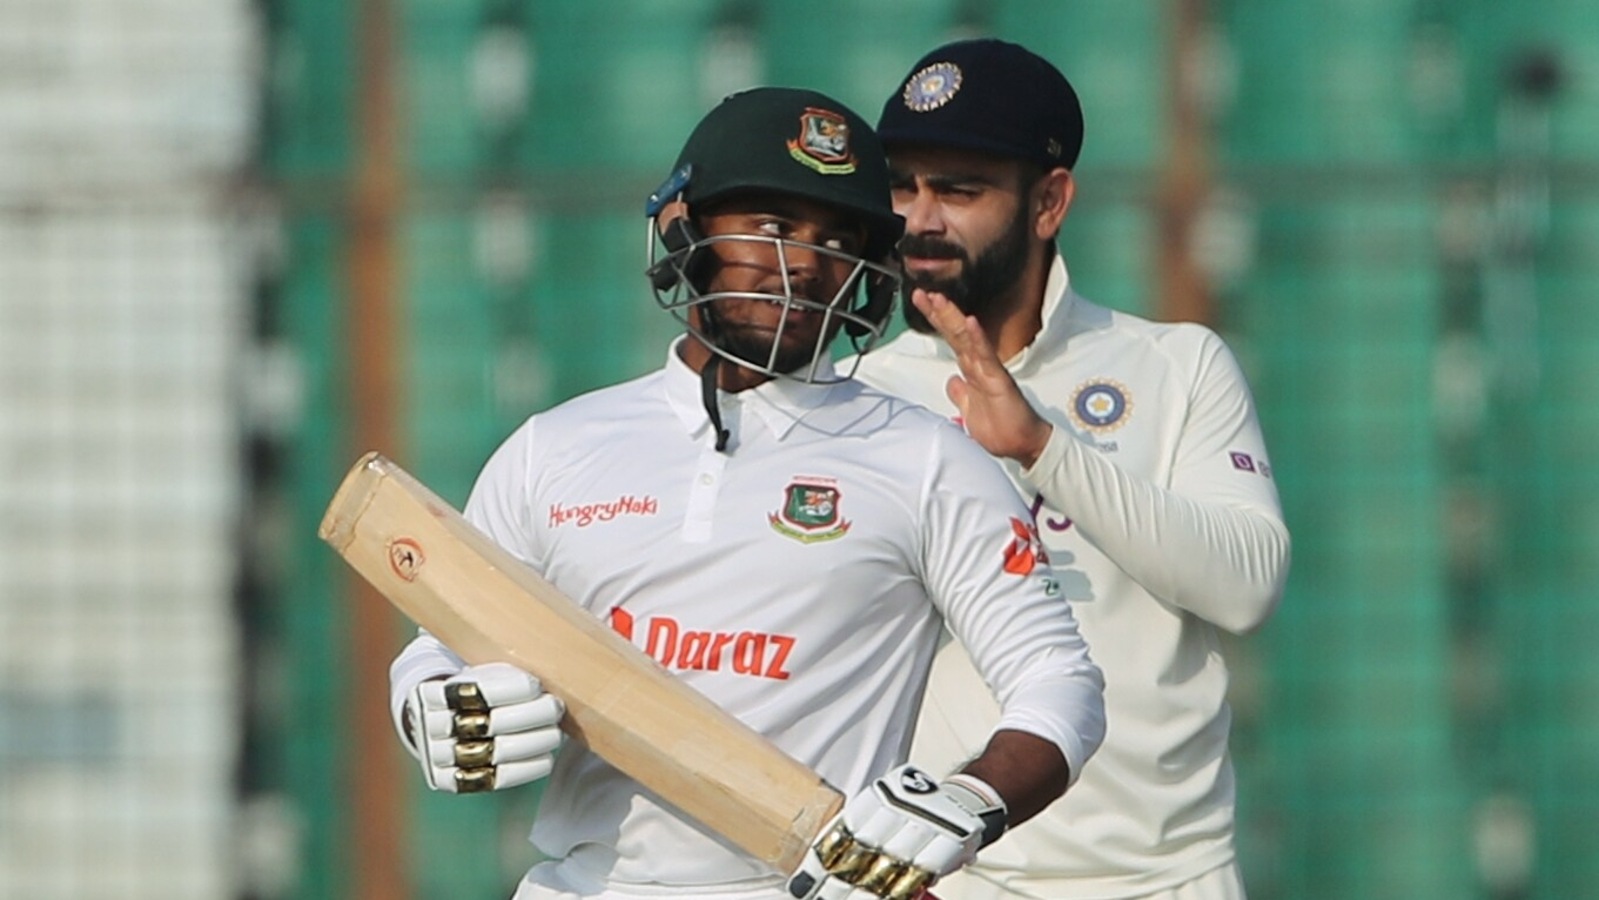 India vs Bangladesh Highlights 1st Test Day 4 BAN post 272/6 at Stumps, match set for Day 5 thriller vs IND Hindustan Times